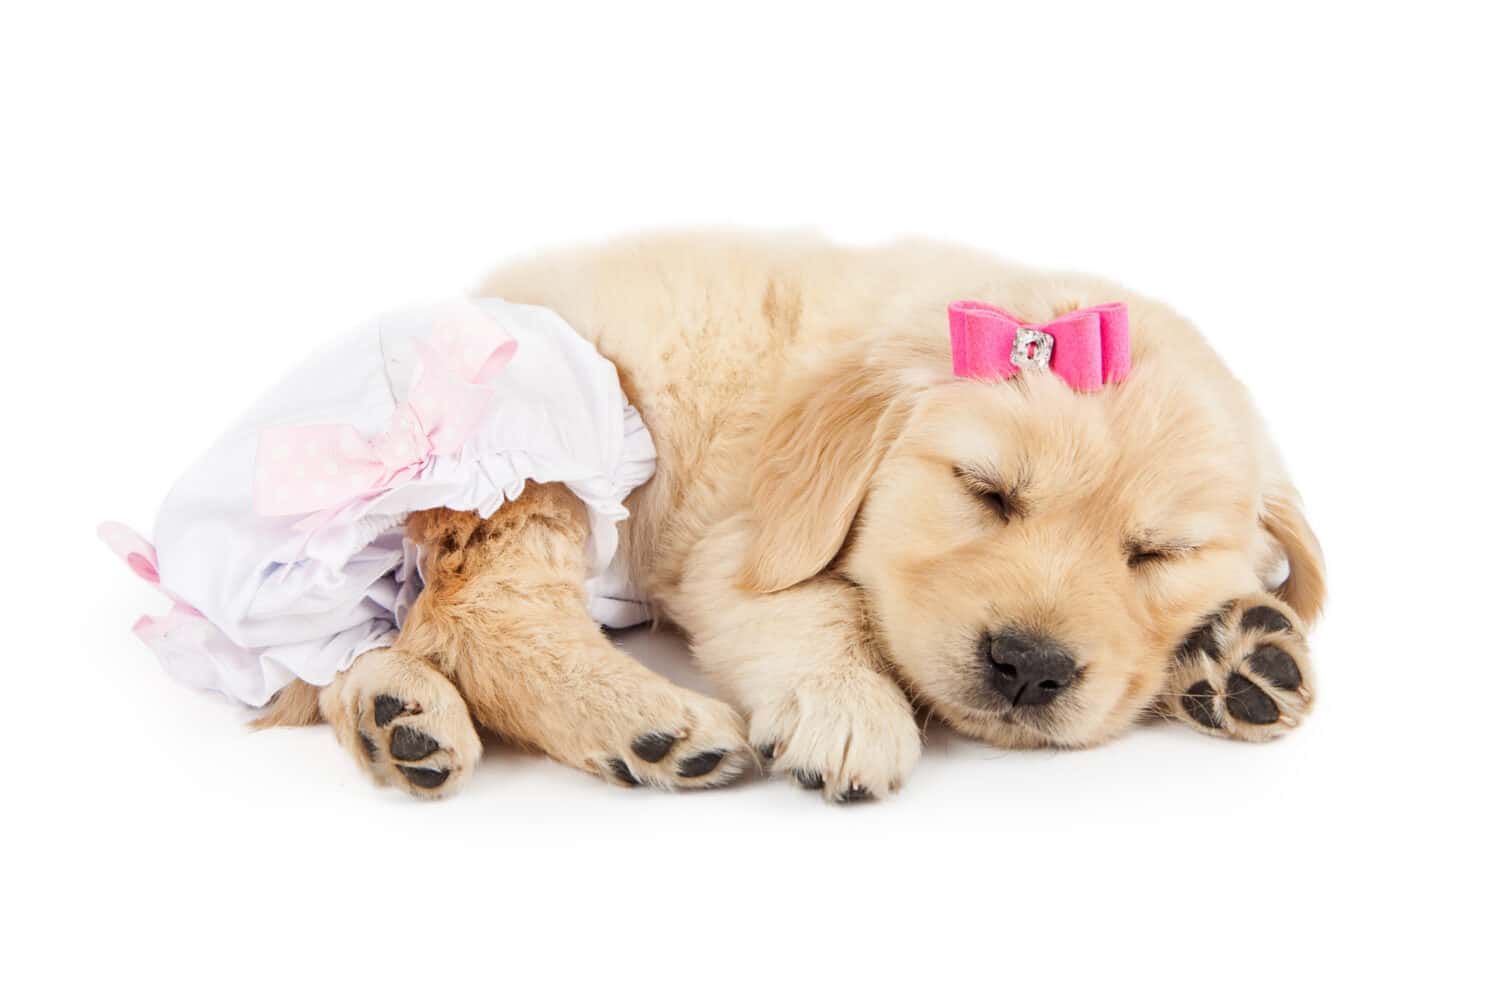 Funny photo of cute little Golden Retriever puppy dog wearing pink bow and diaper romper